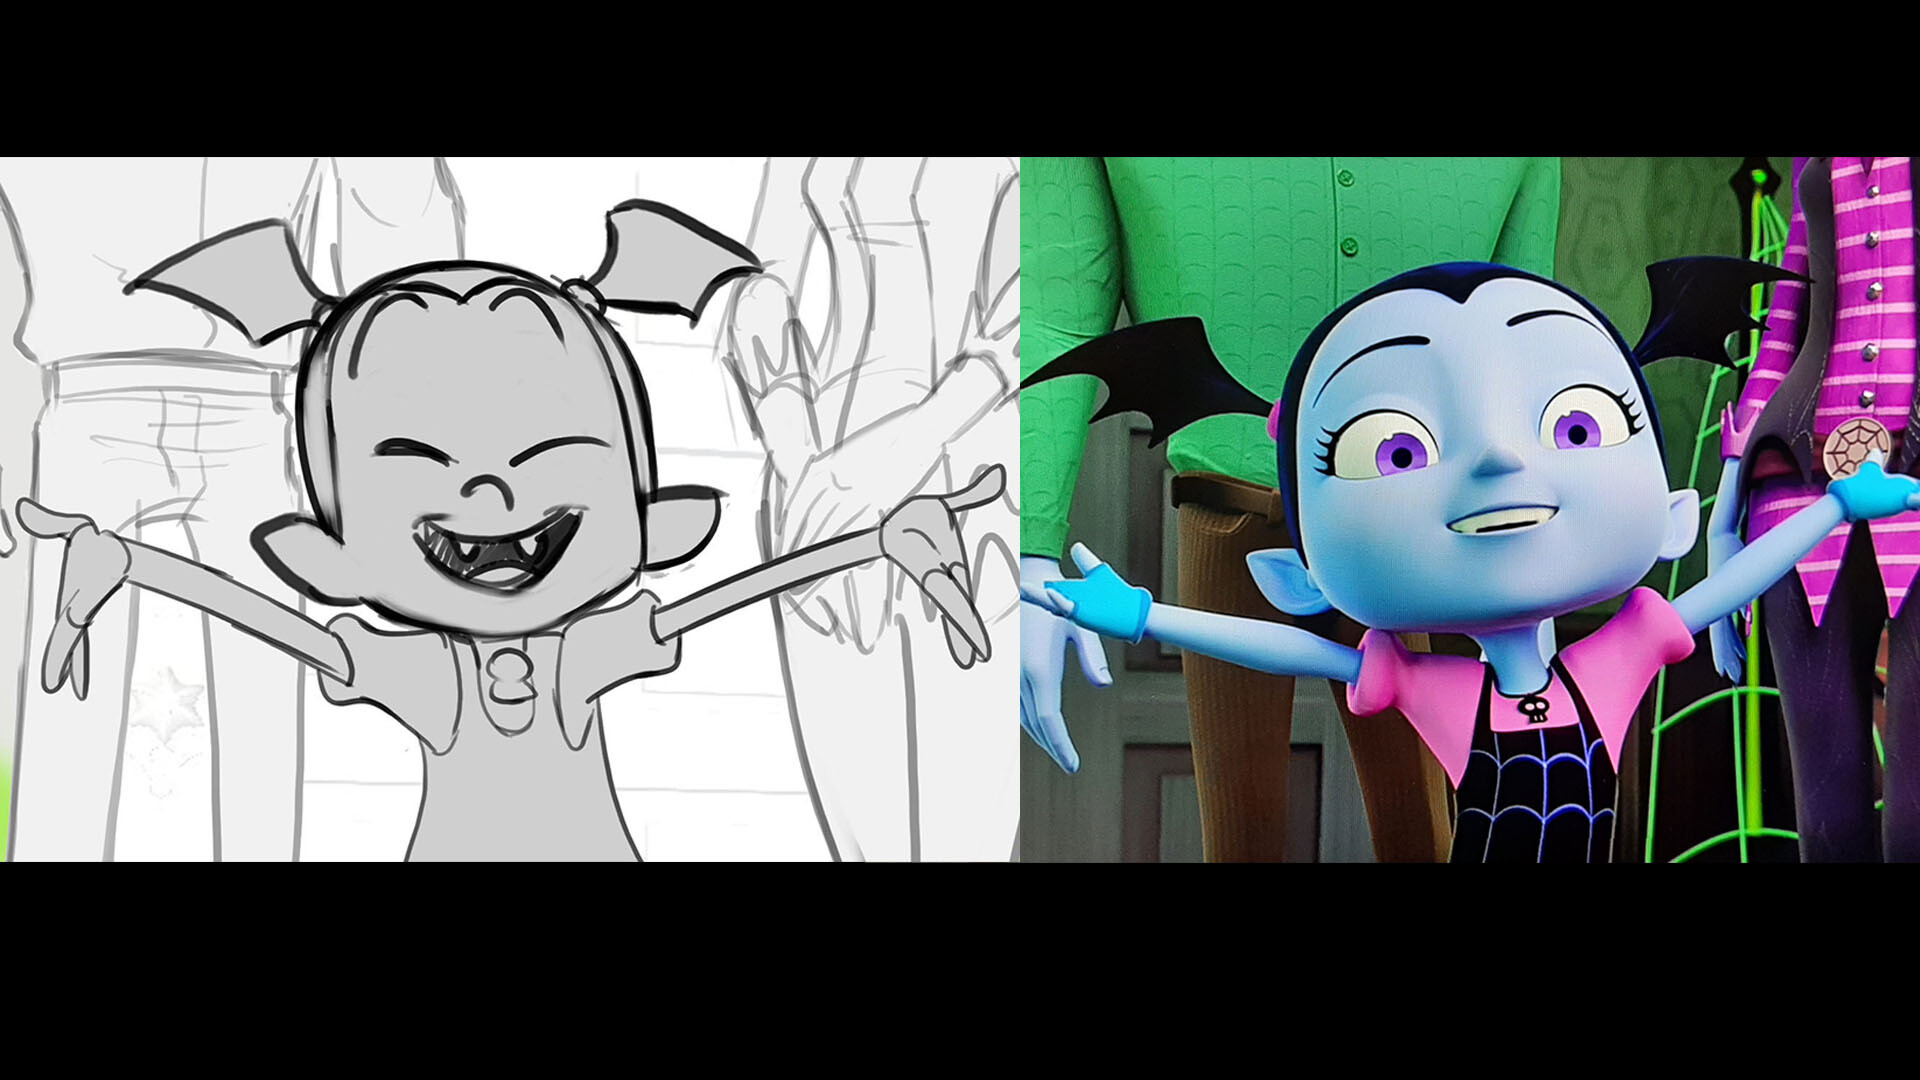 ArtStation - Vampirina 'Trick or Treaters' Storyboards - 'Trick or Treat'  Song Sequence